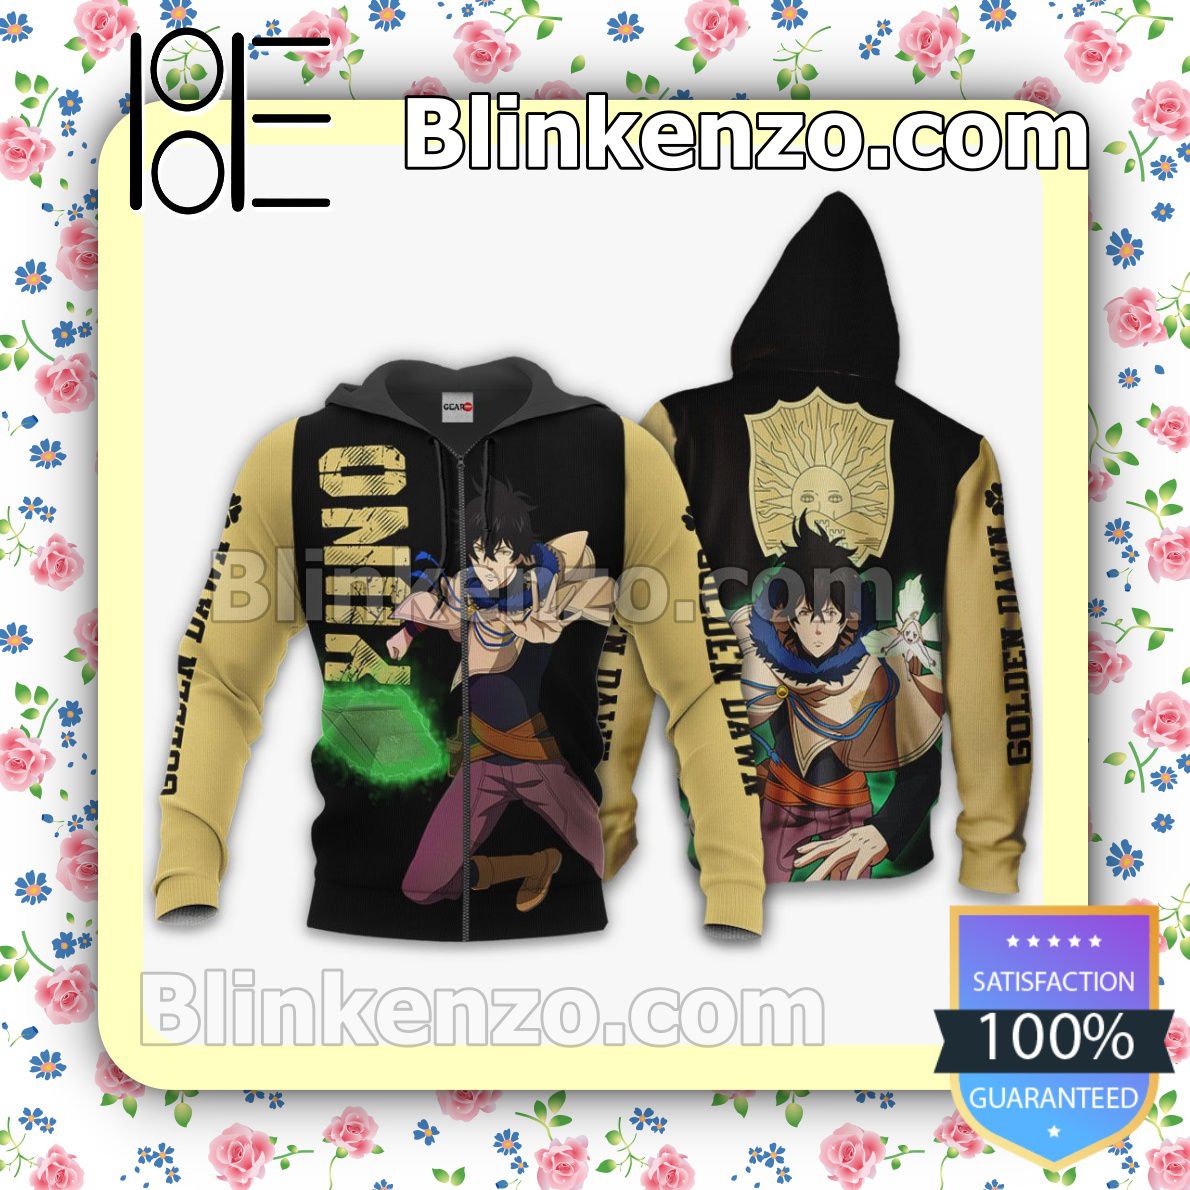 Golden Dawn Yuno Black Clover Anime Personalized T-shirt, Hoodie, Long Sleeve, Bomber Jacket